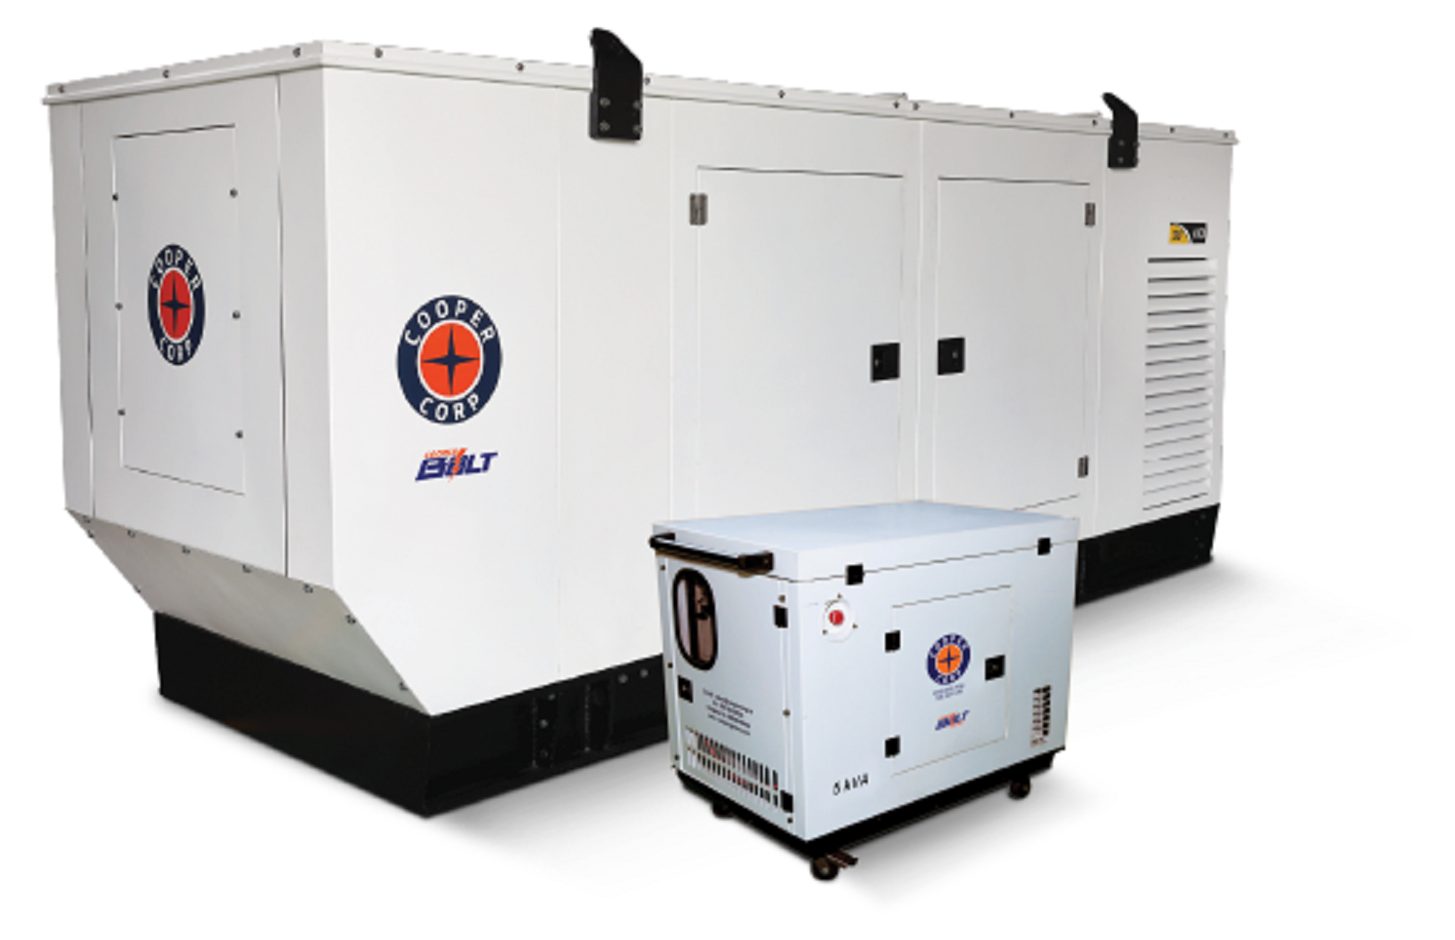 Cooper Corporation Offers a World-Class Genset Series for The Northern Market, Ranging From 5KVA To 250KVA decoding=